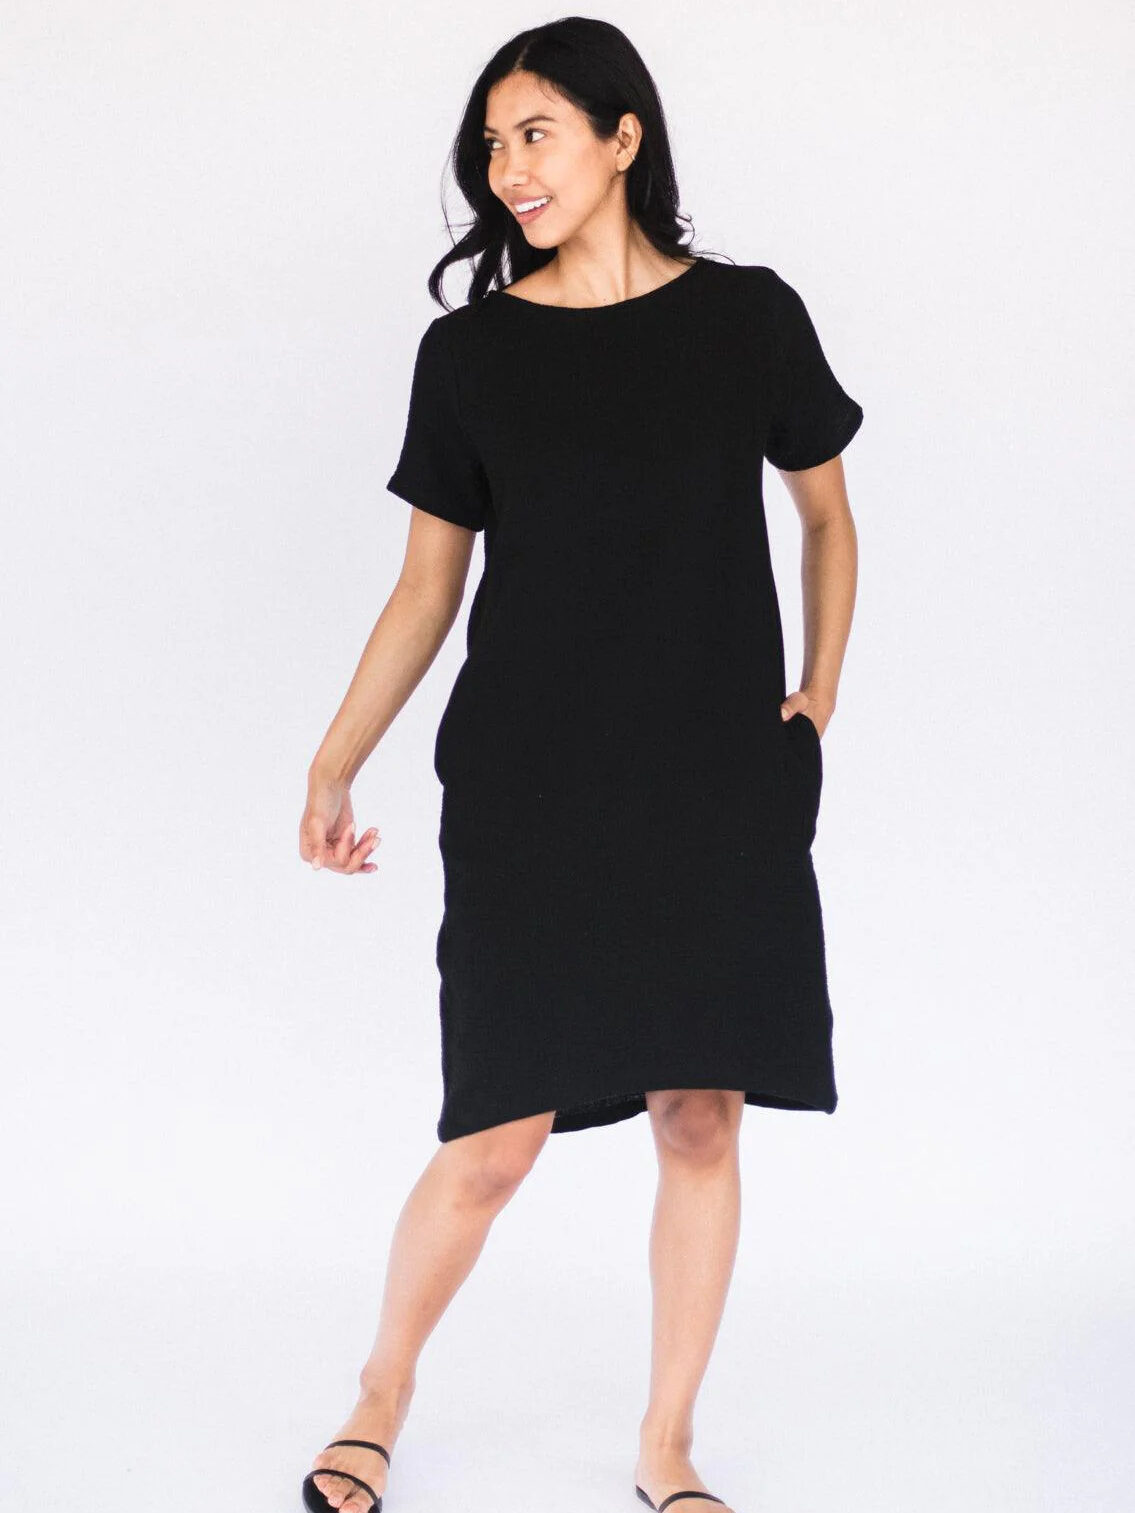 A woman in a black dress and sandals smiling and looking to the side against a white background.